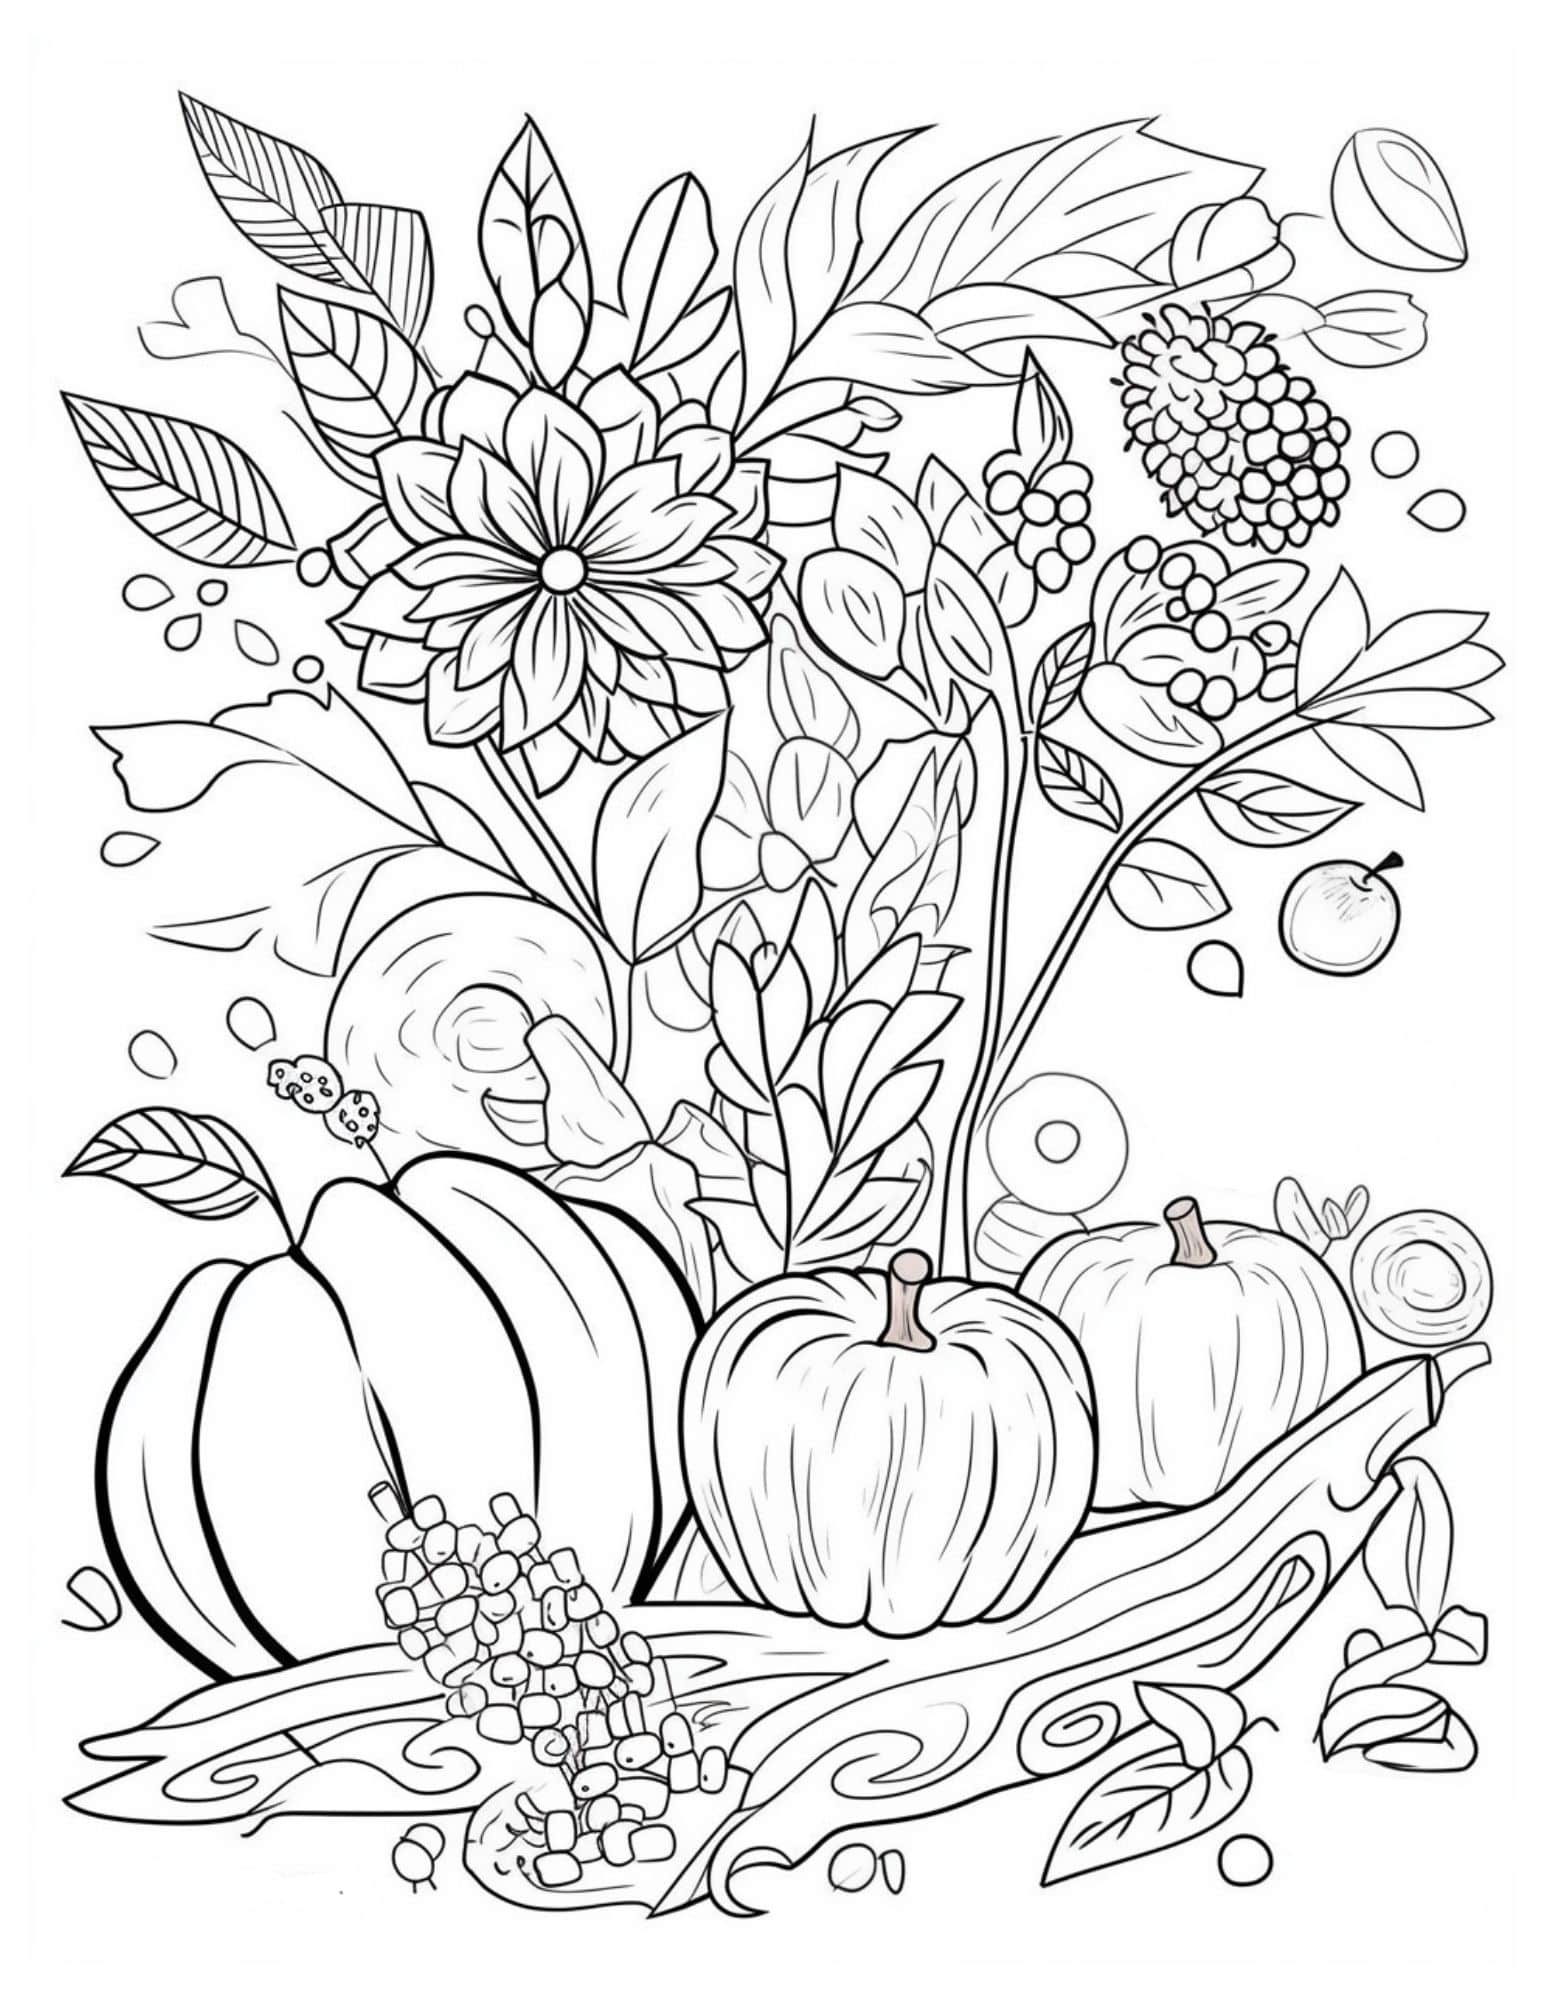 Fall coloring pages for both kids and adults